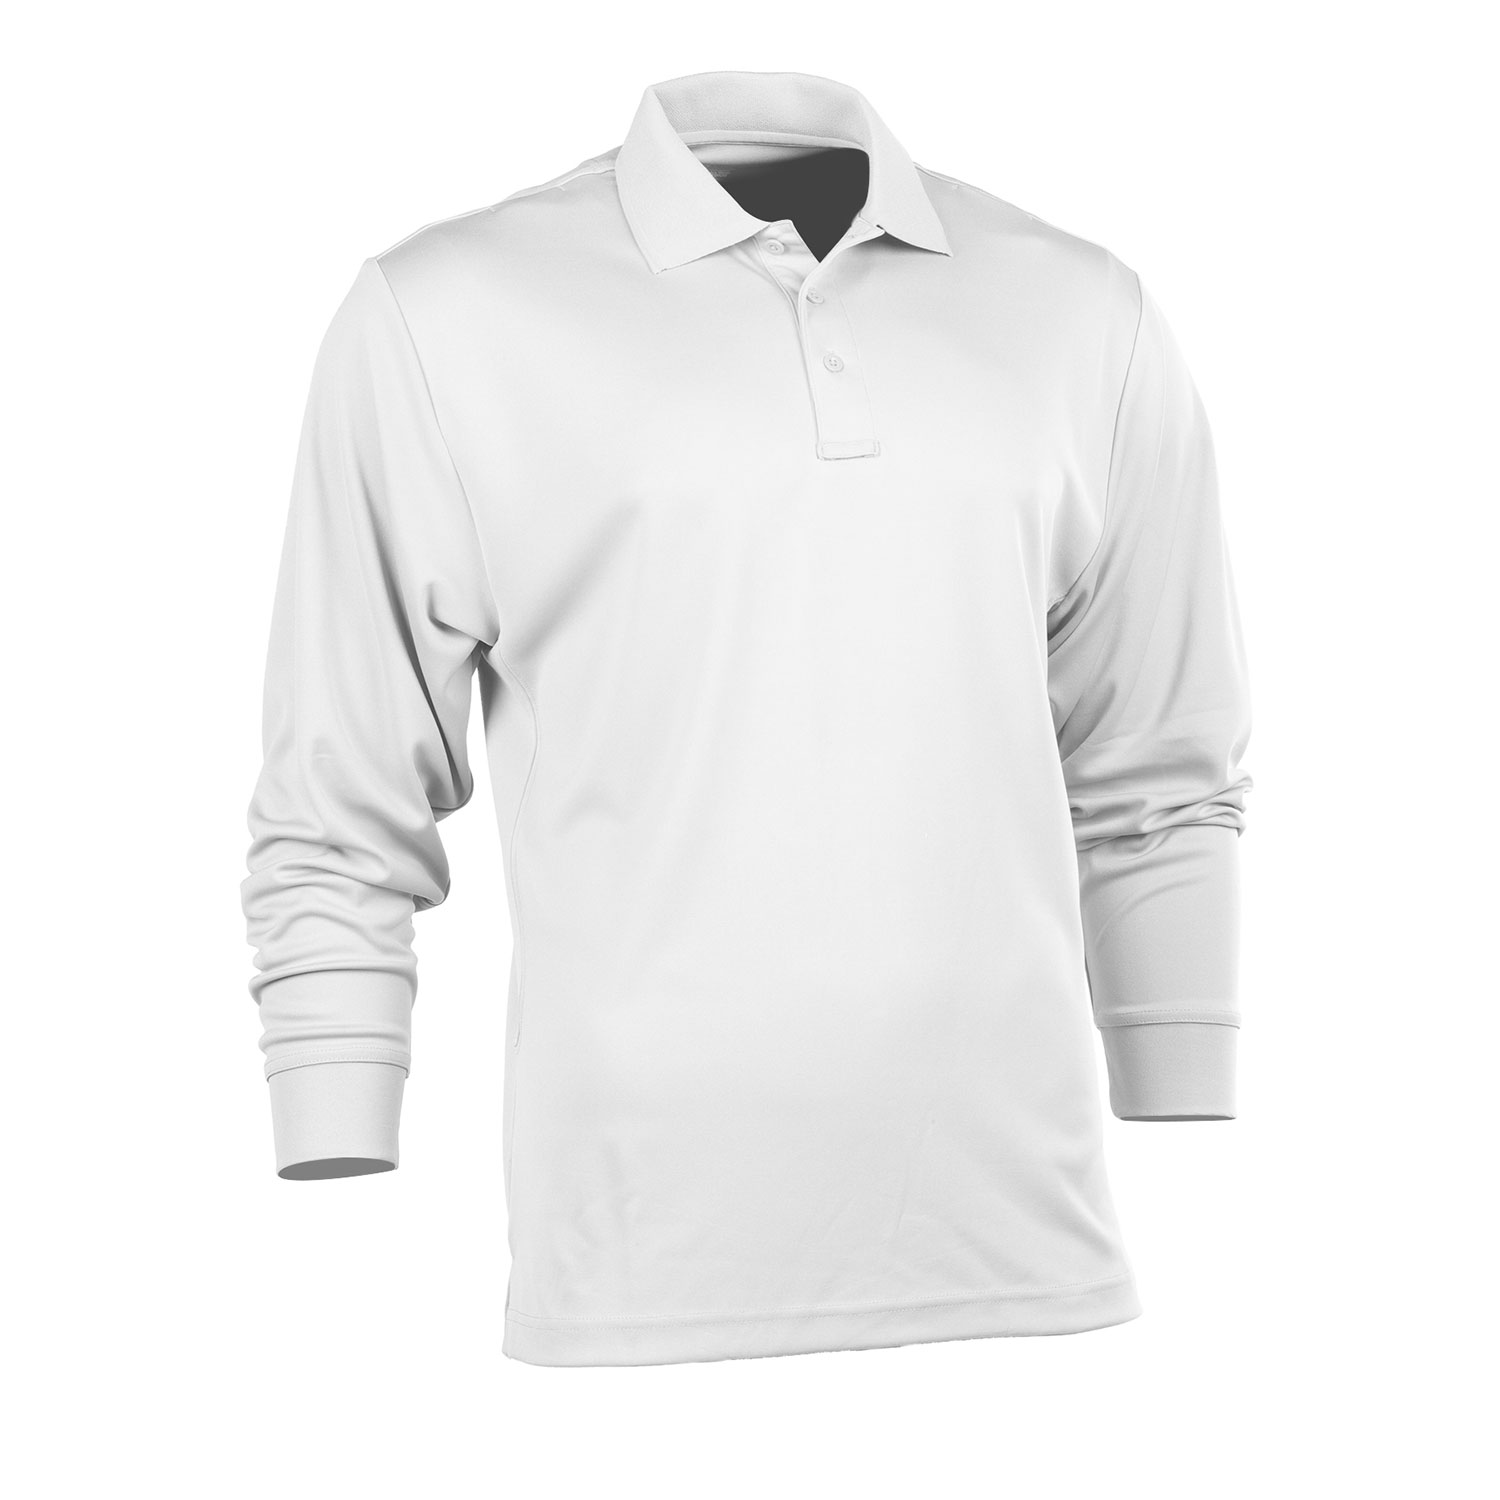 Galls G-Tac Tactical Performance Long Sleeve Polo